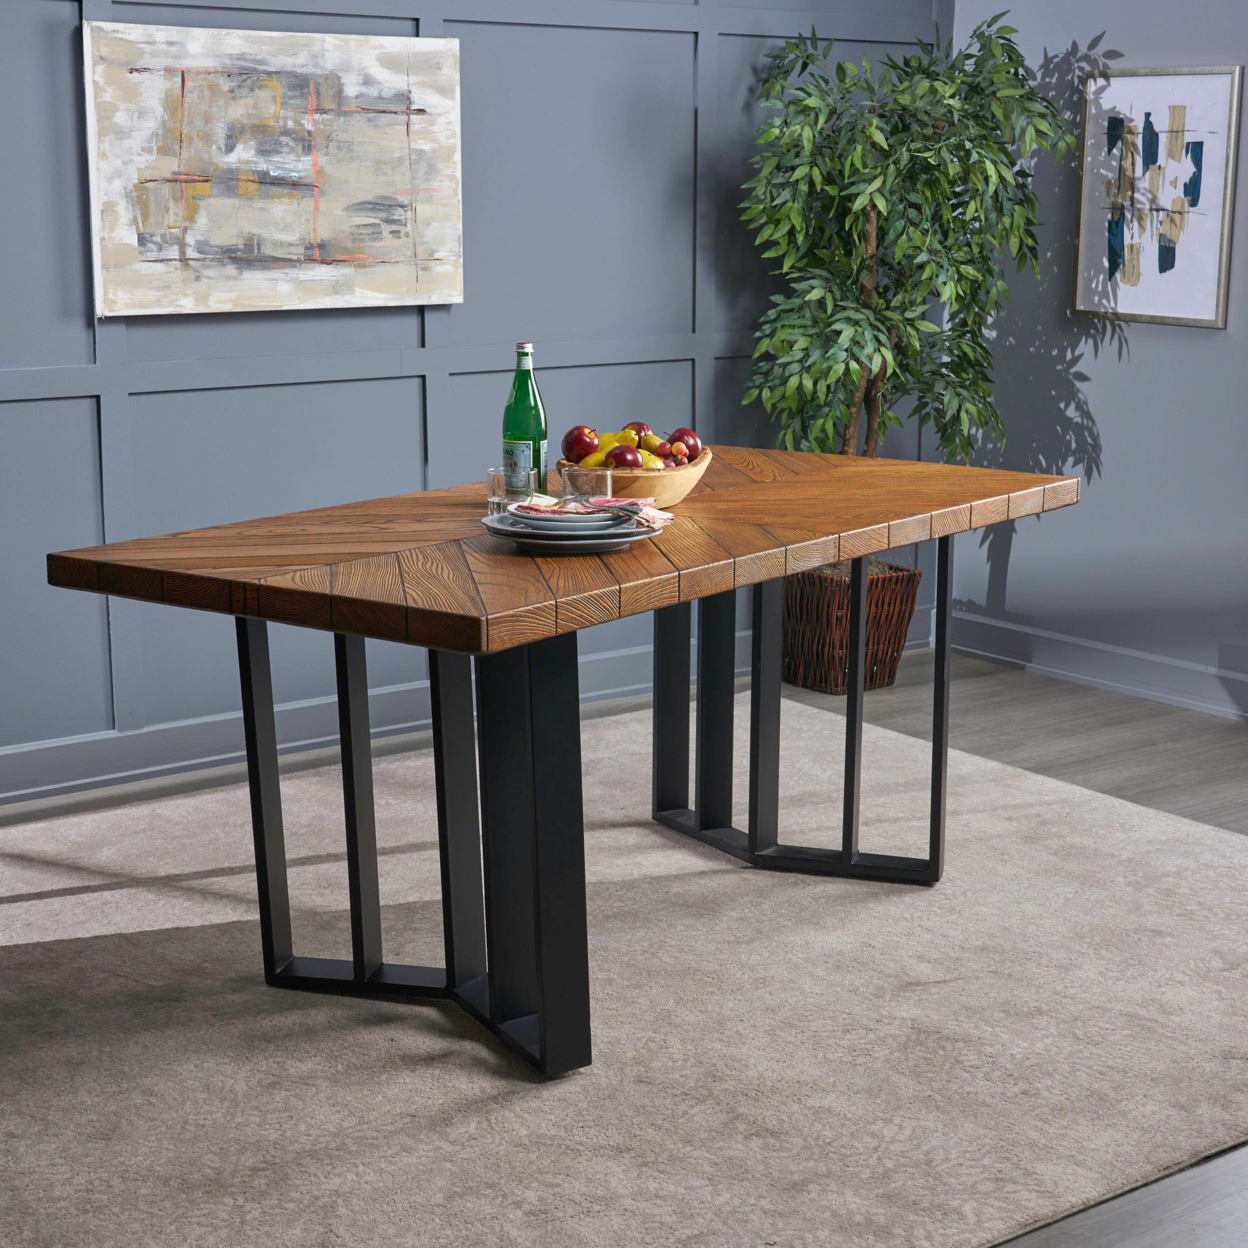 Santa Rosa Indoor Farmhouse Light Weight Concrete Dining Table - Textured Gray